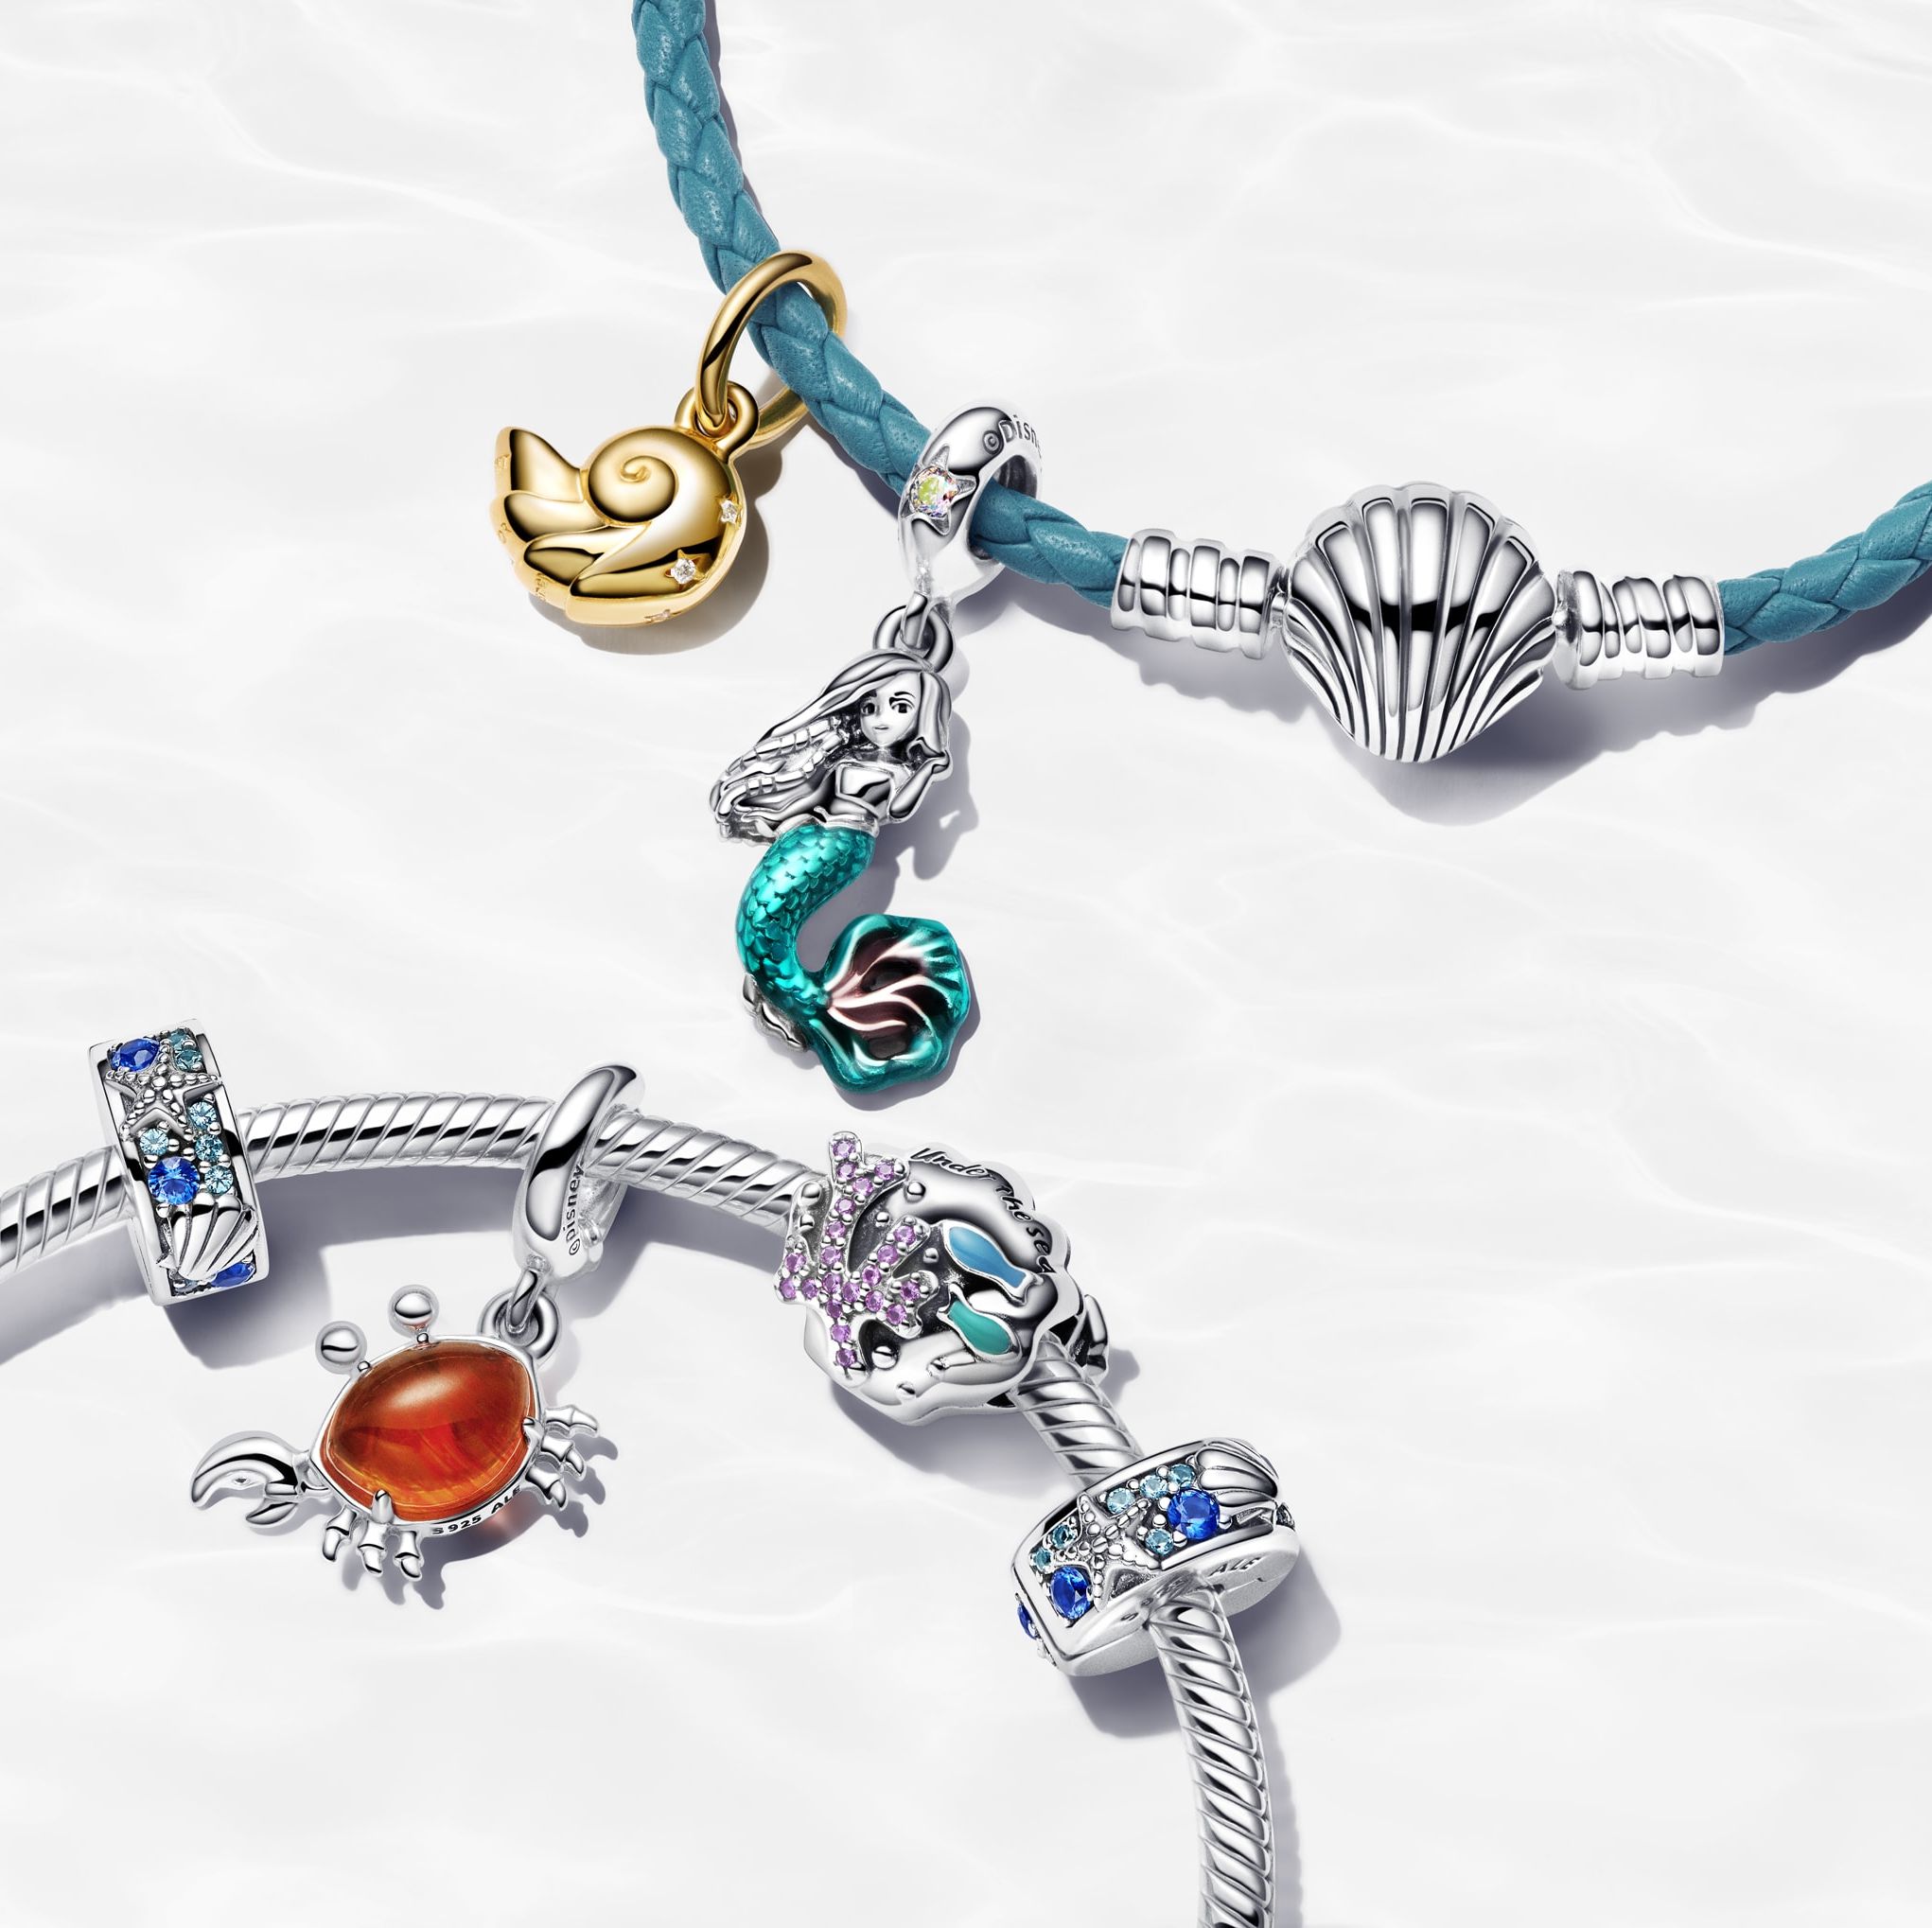 Pandora Just Collaborated With Disney on a Collection Inspired by ‘The Little Mermaid’...and I’m Obsessed